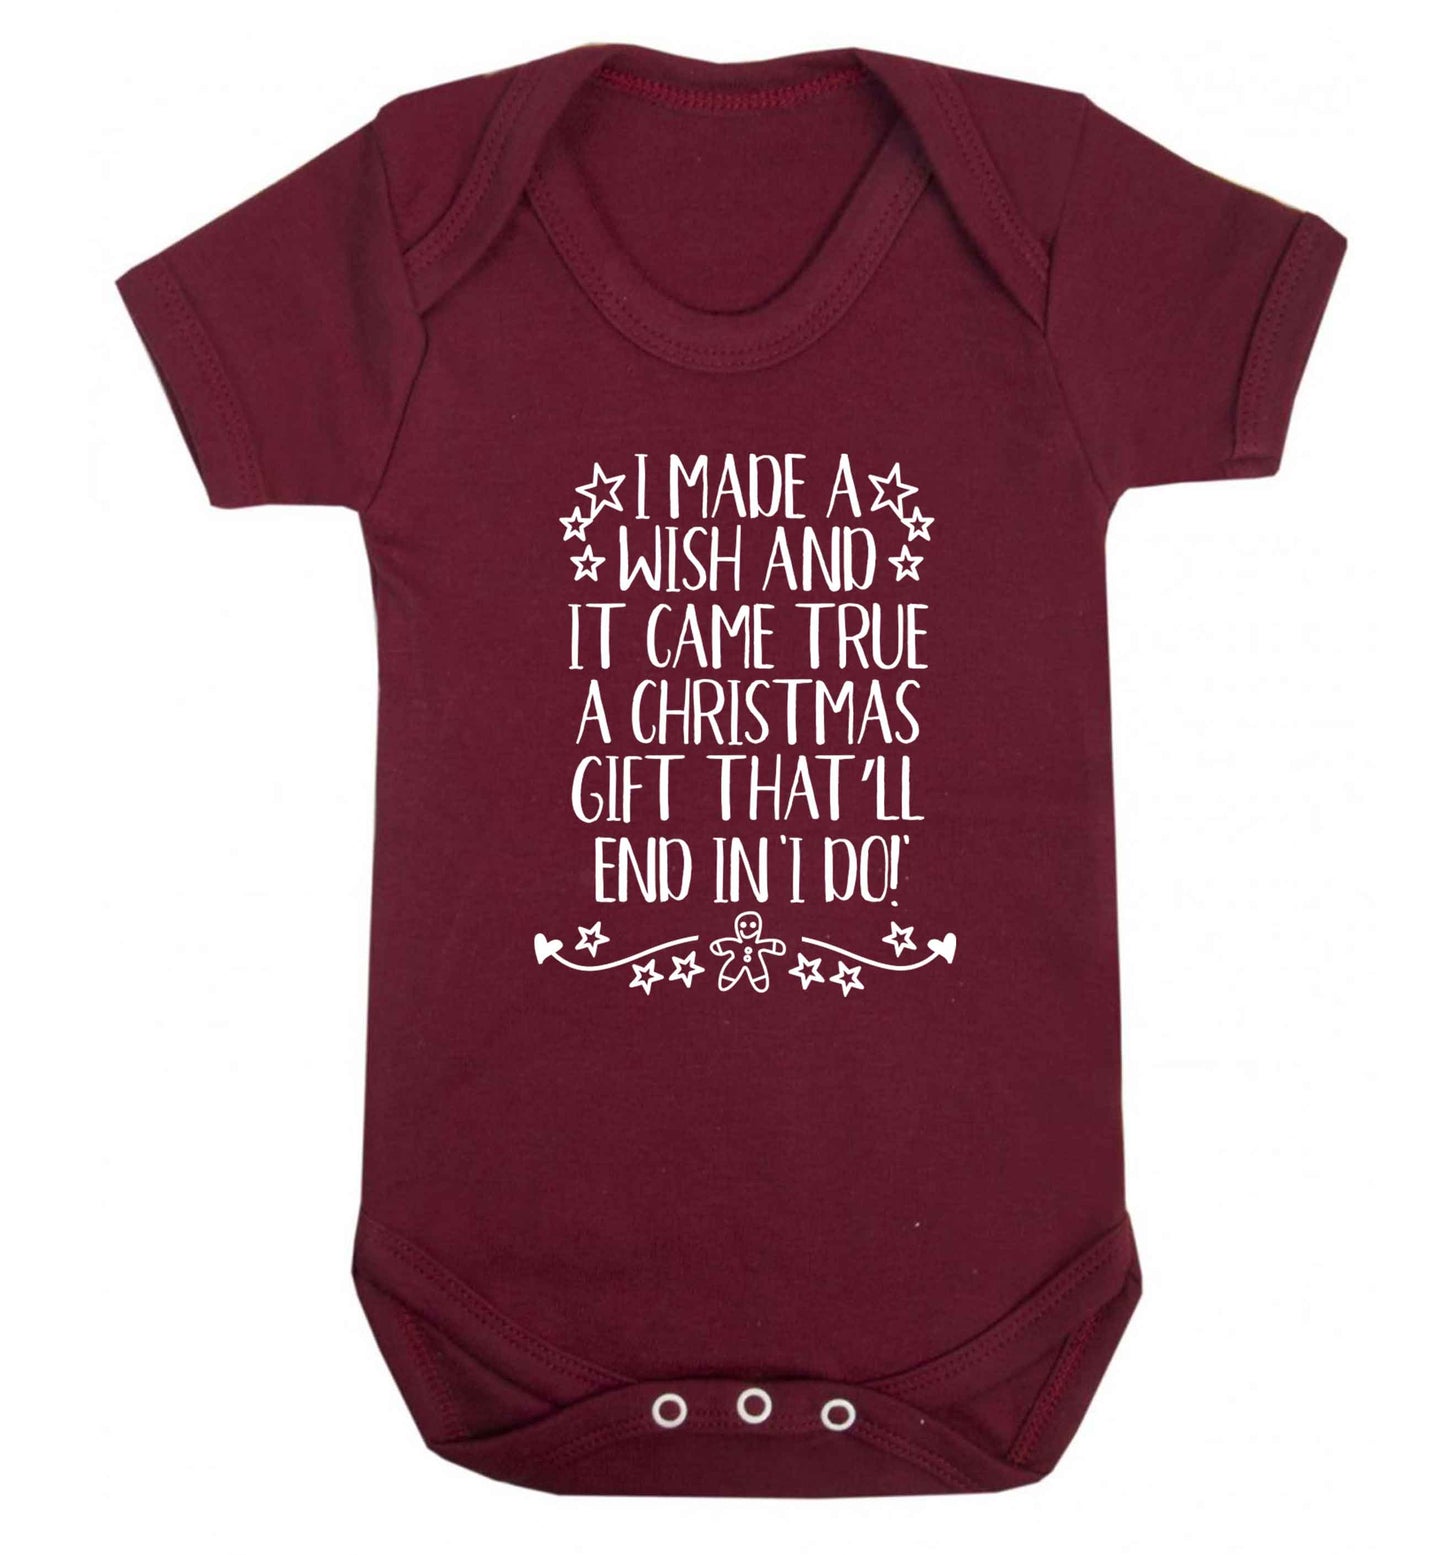 I made a wish and it came true a Christmas gift that'll end in 'I do' Baby Vest maroon 18-24 months